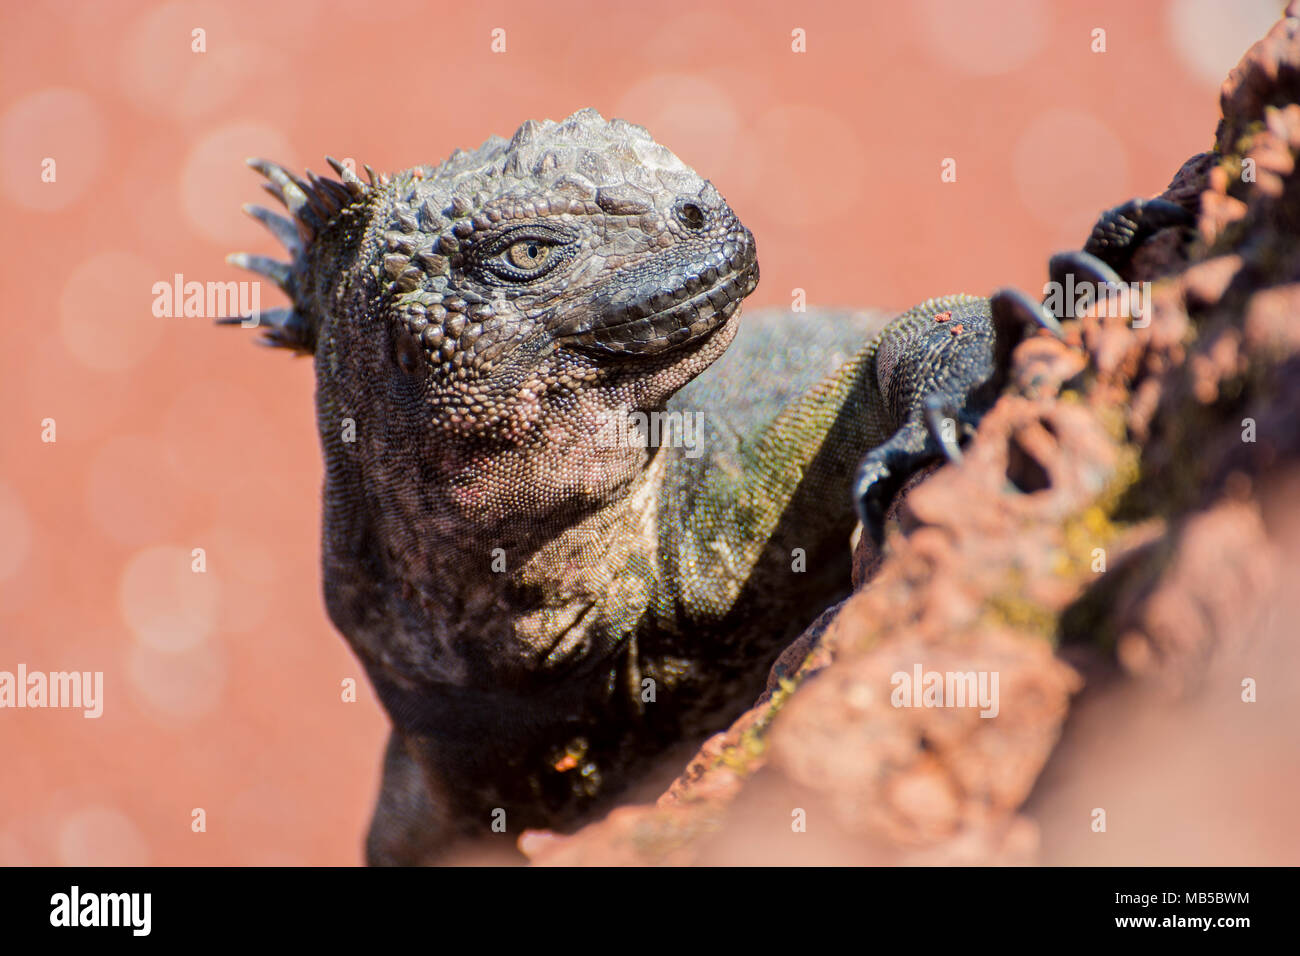 Subspecies of the galapagos marine iguana (Amblyrhynchus cristatus wikelskii), this subspecies is considered endangered and is found on Rabida island. Stock Photo